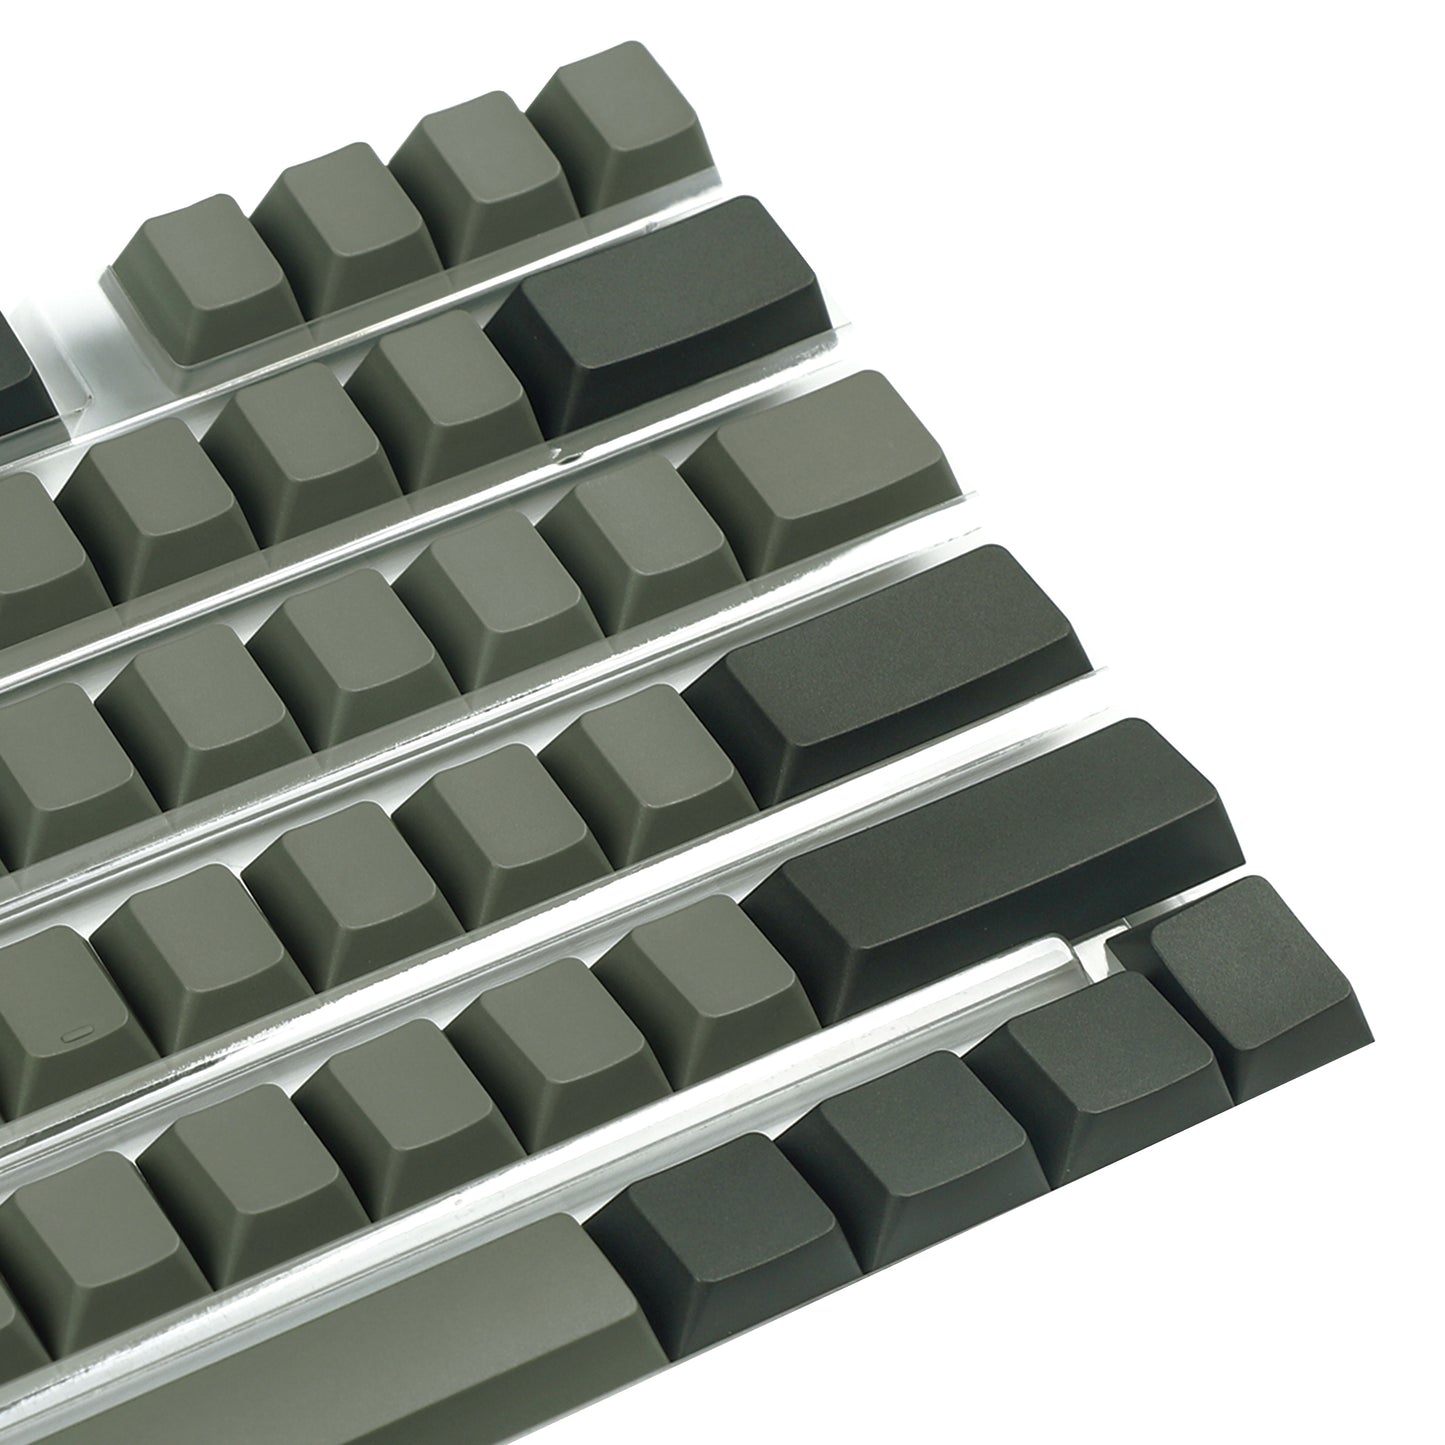 YMDK Dolch Blank 129 Keycaps(Cherry Profile PBT 1.5mm Thickness)